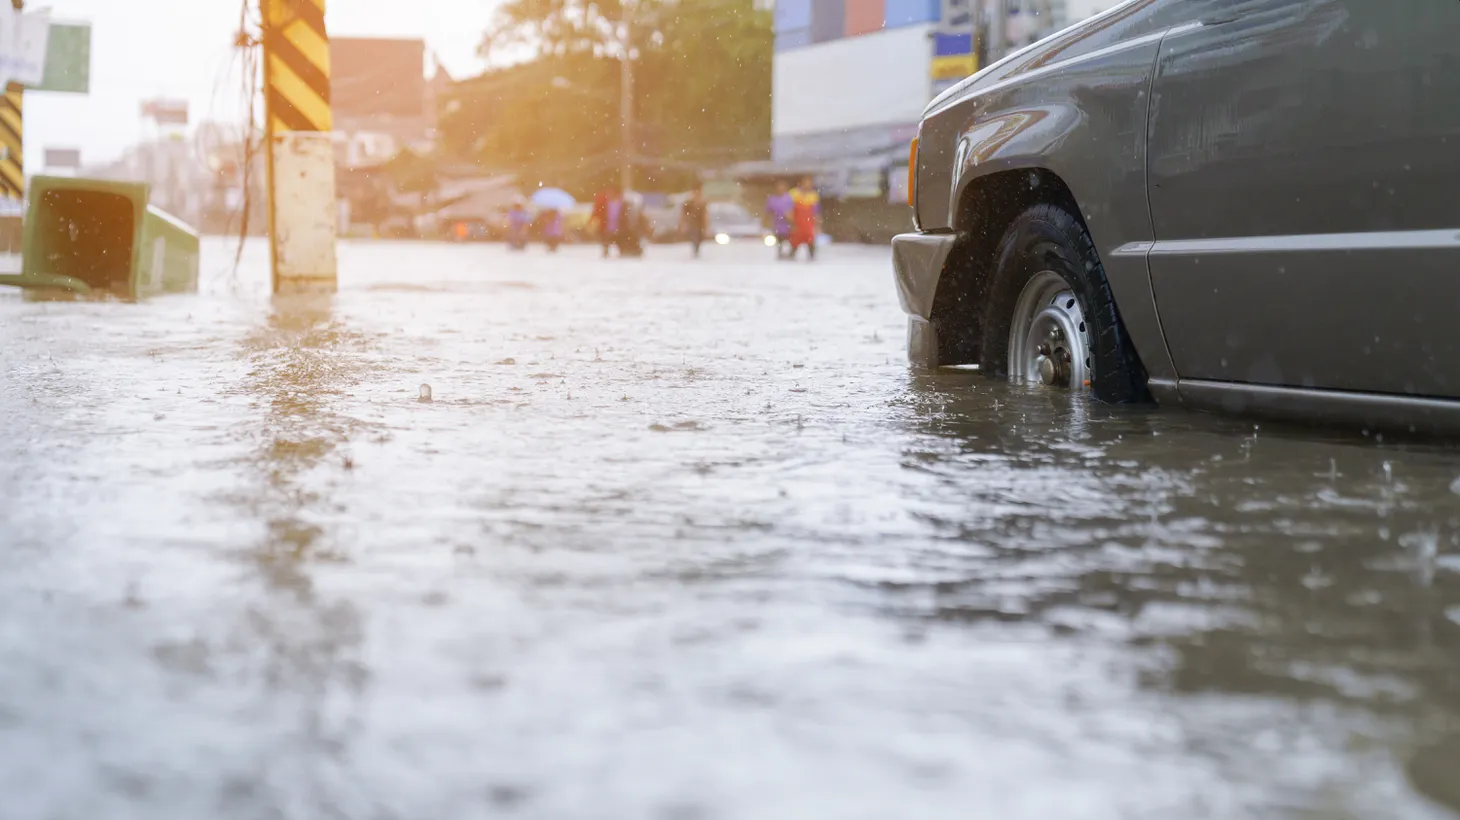 In LA, drought and fire are considered the biggest climate problems. But Angelenos should also worry about flooding, according to a new study from UC Irvine.